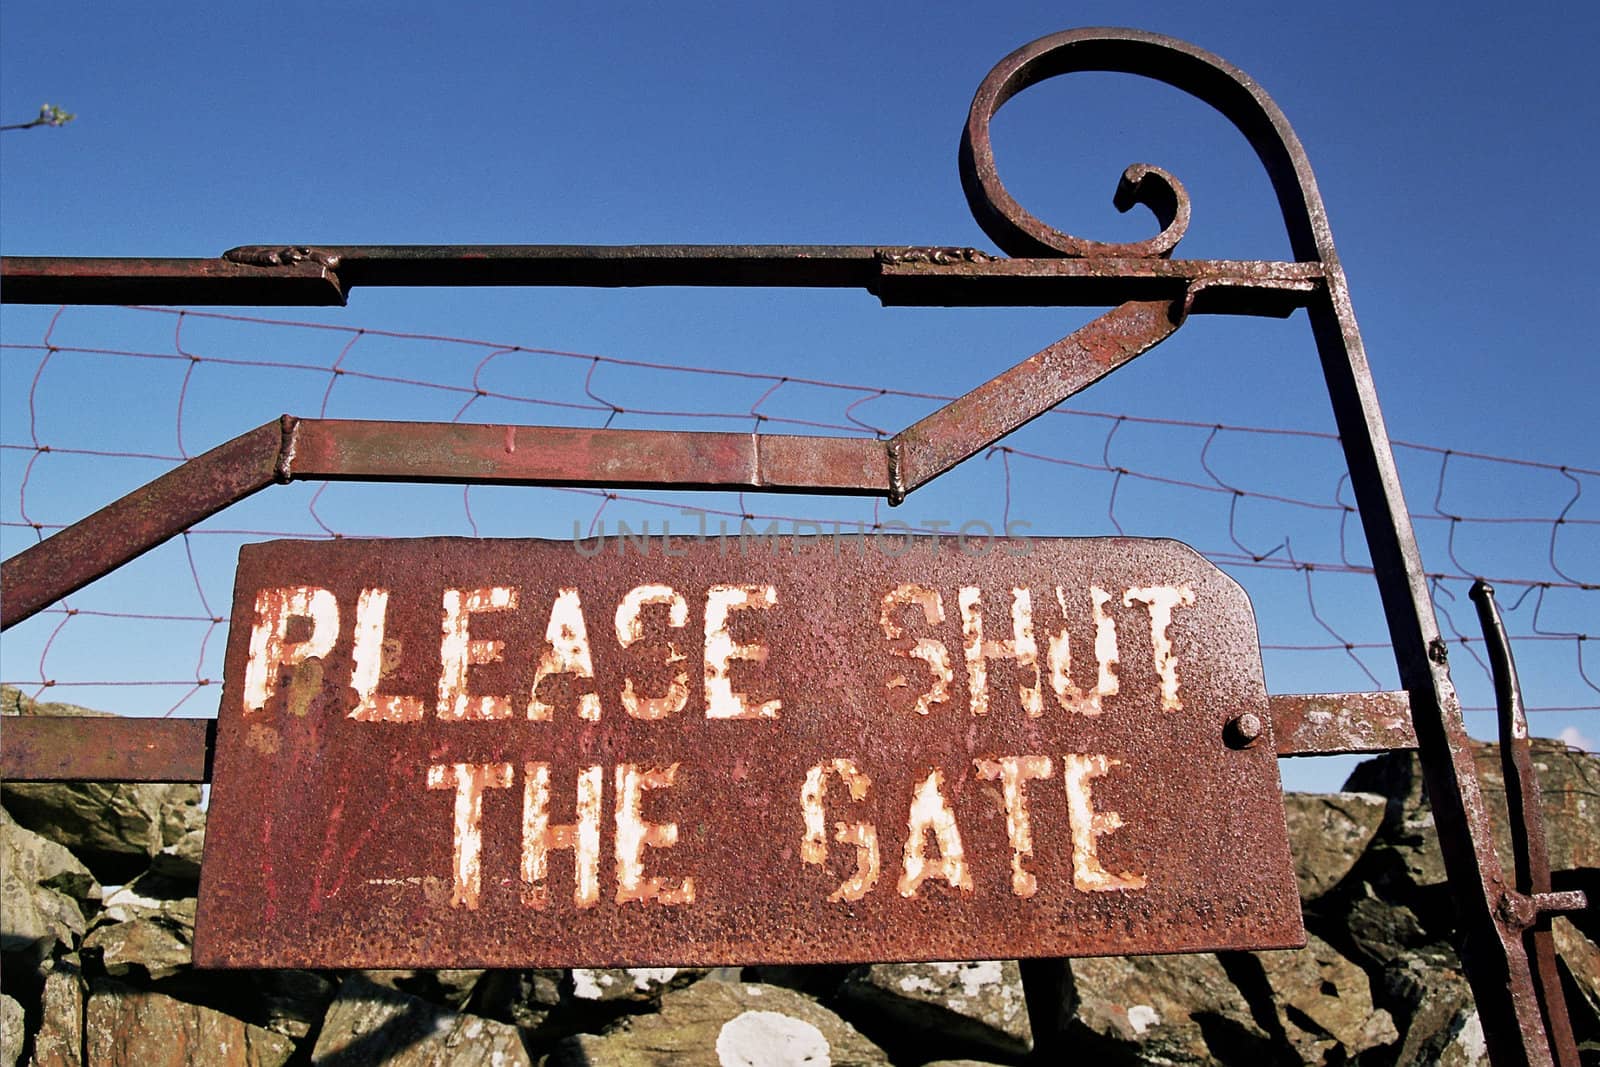 A metal rusty sign on an old gate  with the words 'PLEASE SHUT THE GATE'.